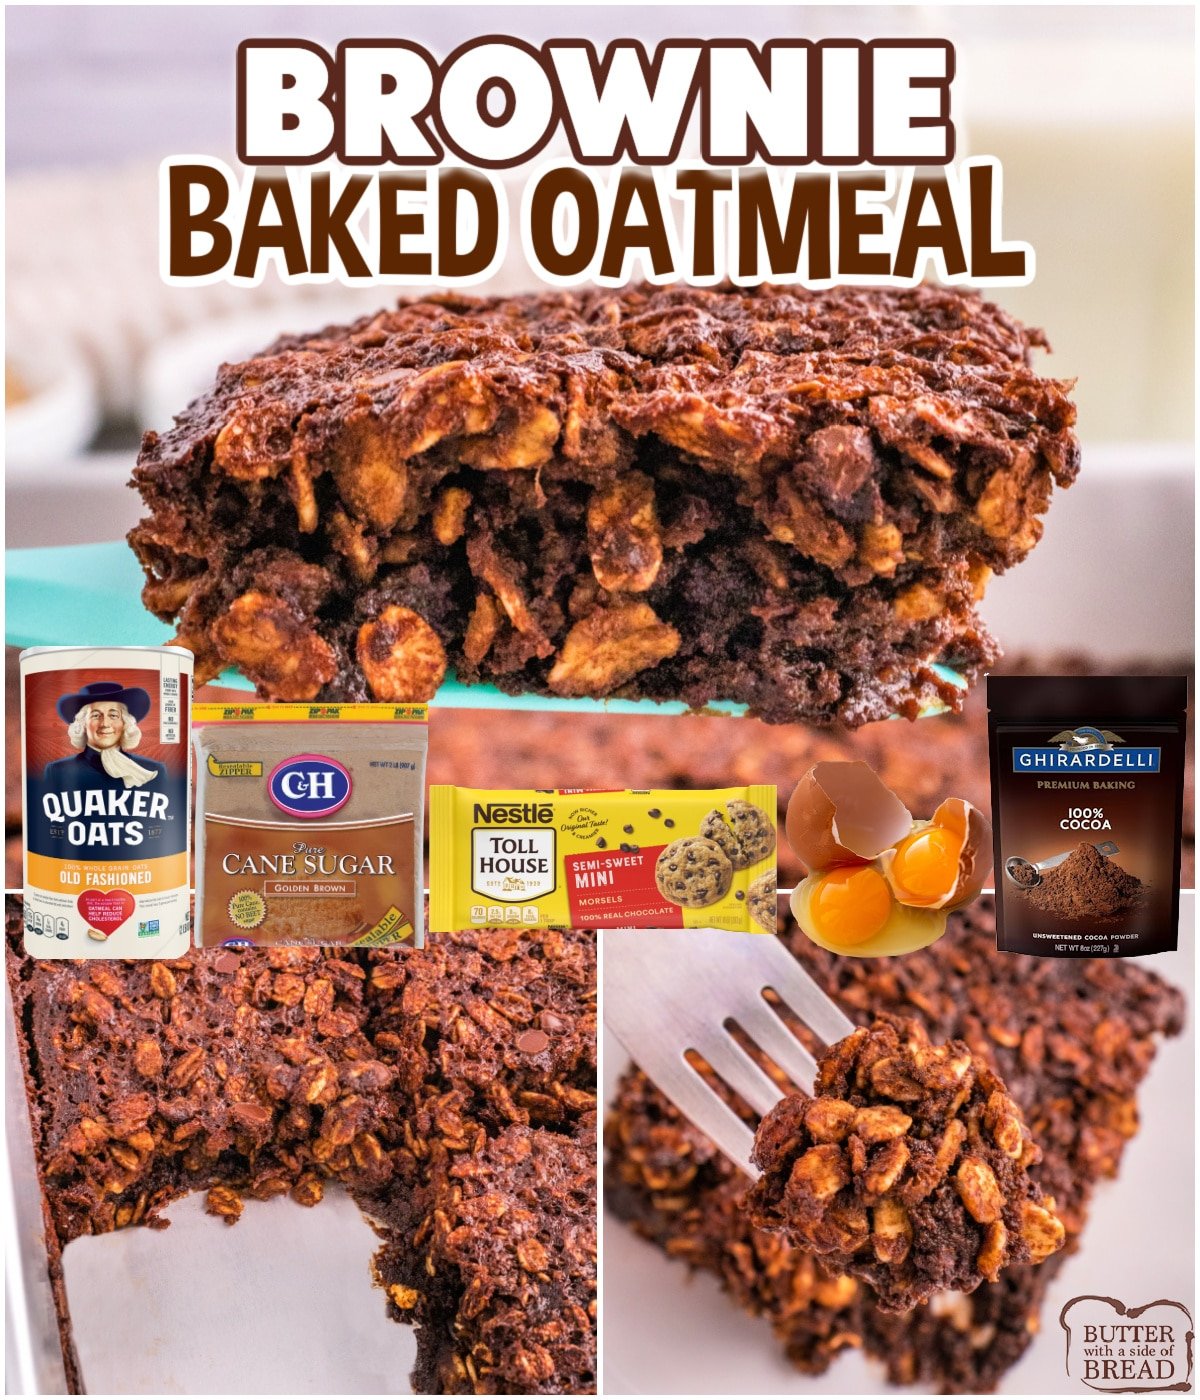 Brownie Baked Oatmeal is a delicious breakfast recipe that tastes like dessert. Made with oats, cocoa, eggs, milk, and chocolate chips, this simple baked oatmeal recipe is perfect for breakfast, or even dessert! 